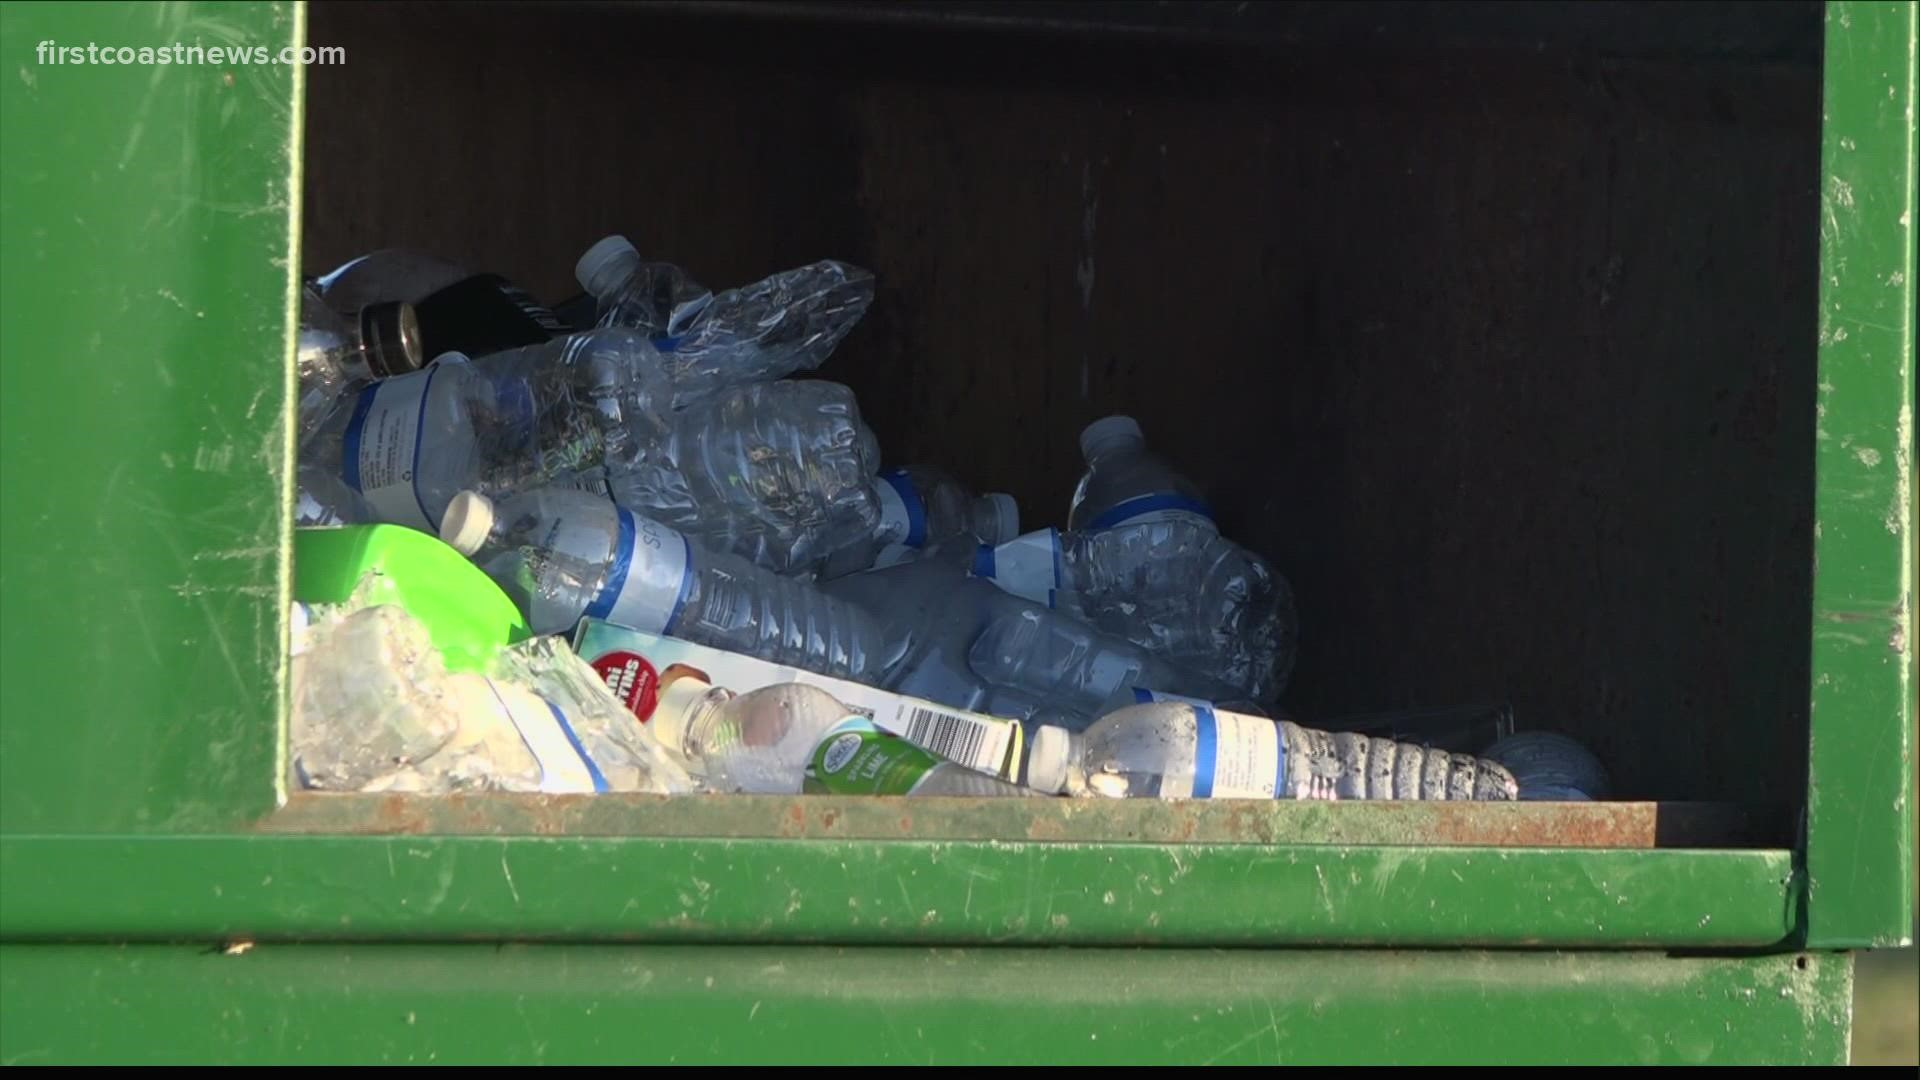 “We have seen a marked improvement, but we are still evaluating the situation to determine when we can return to regular recycling,” Mayor Curry said in a statement.